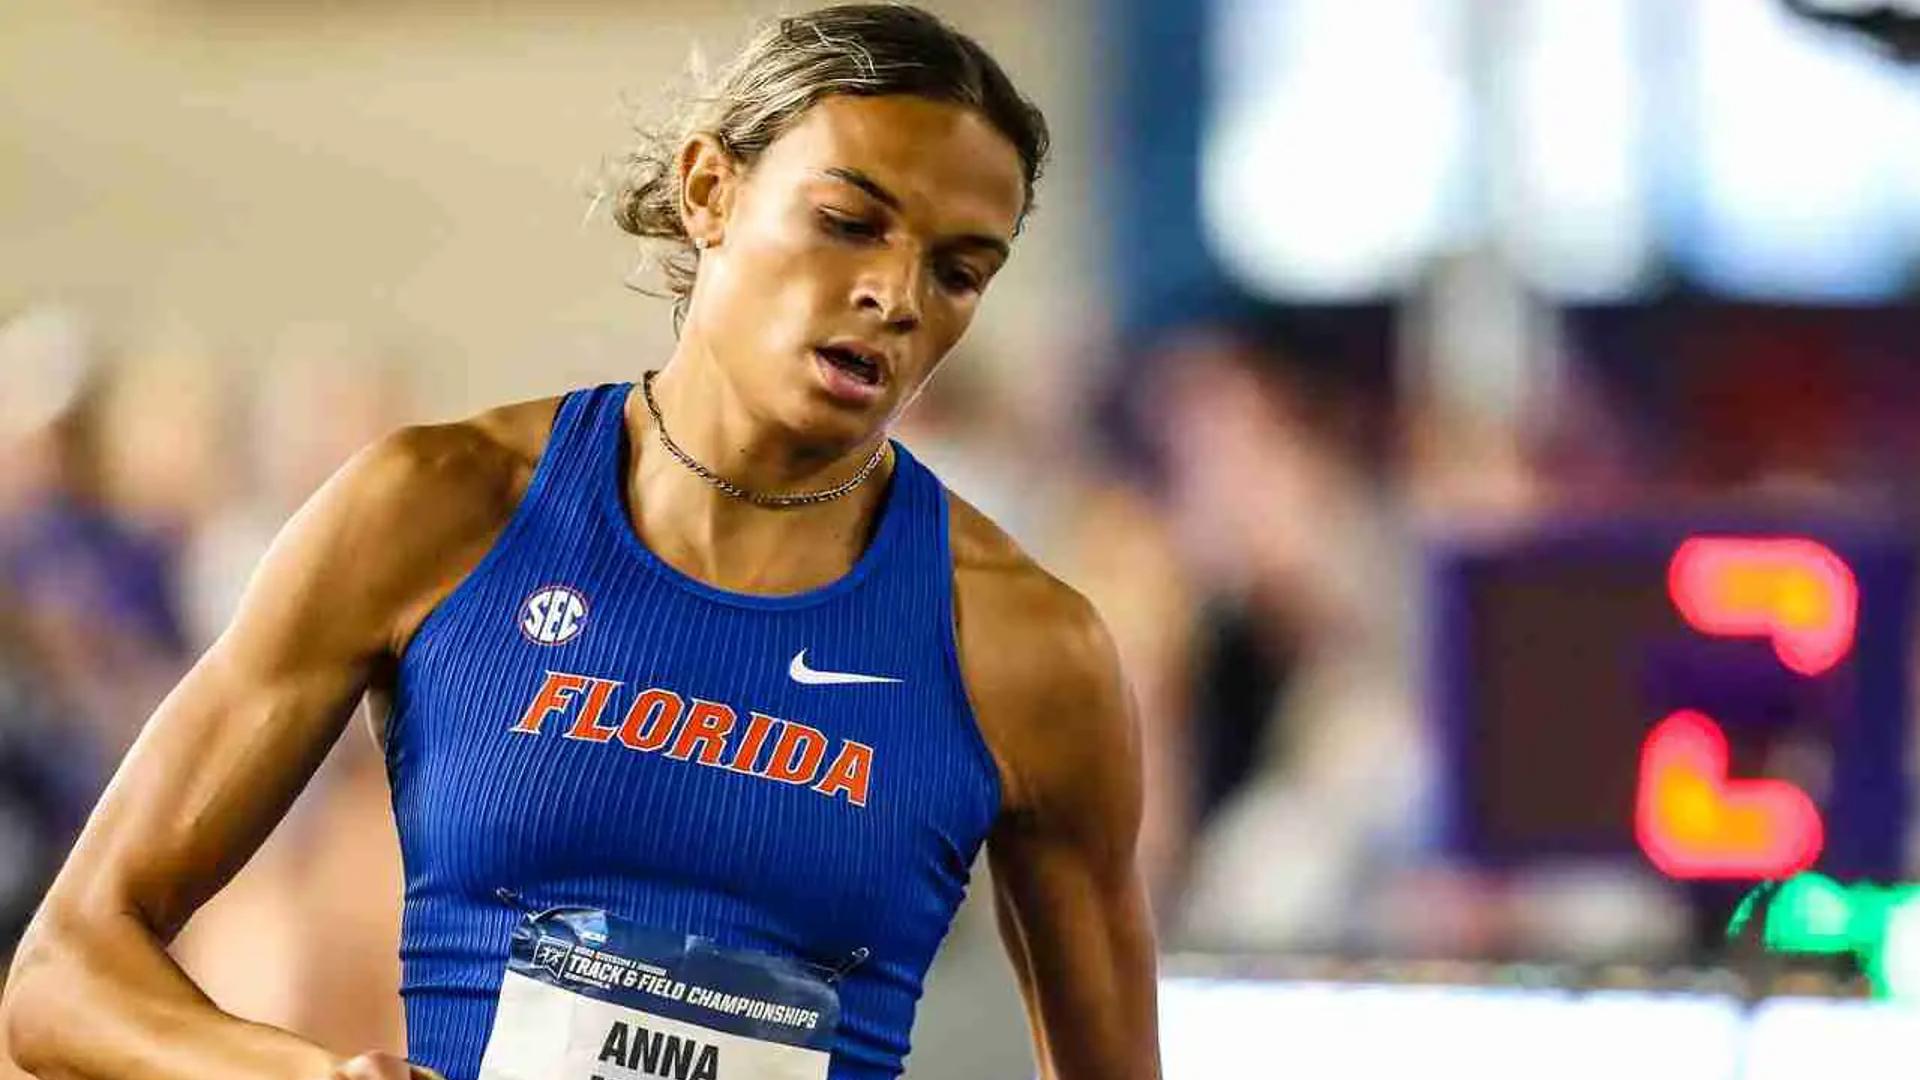 Anna Hall at the USATF championships (Hall in a file photo)